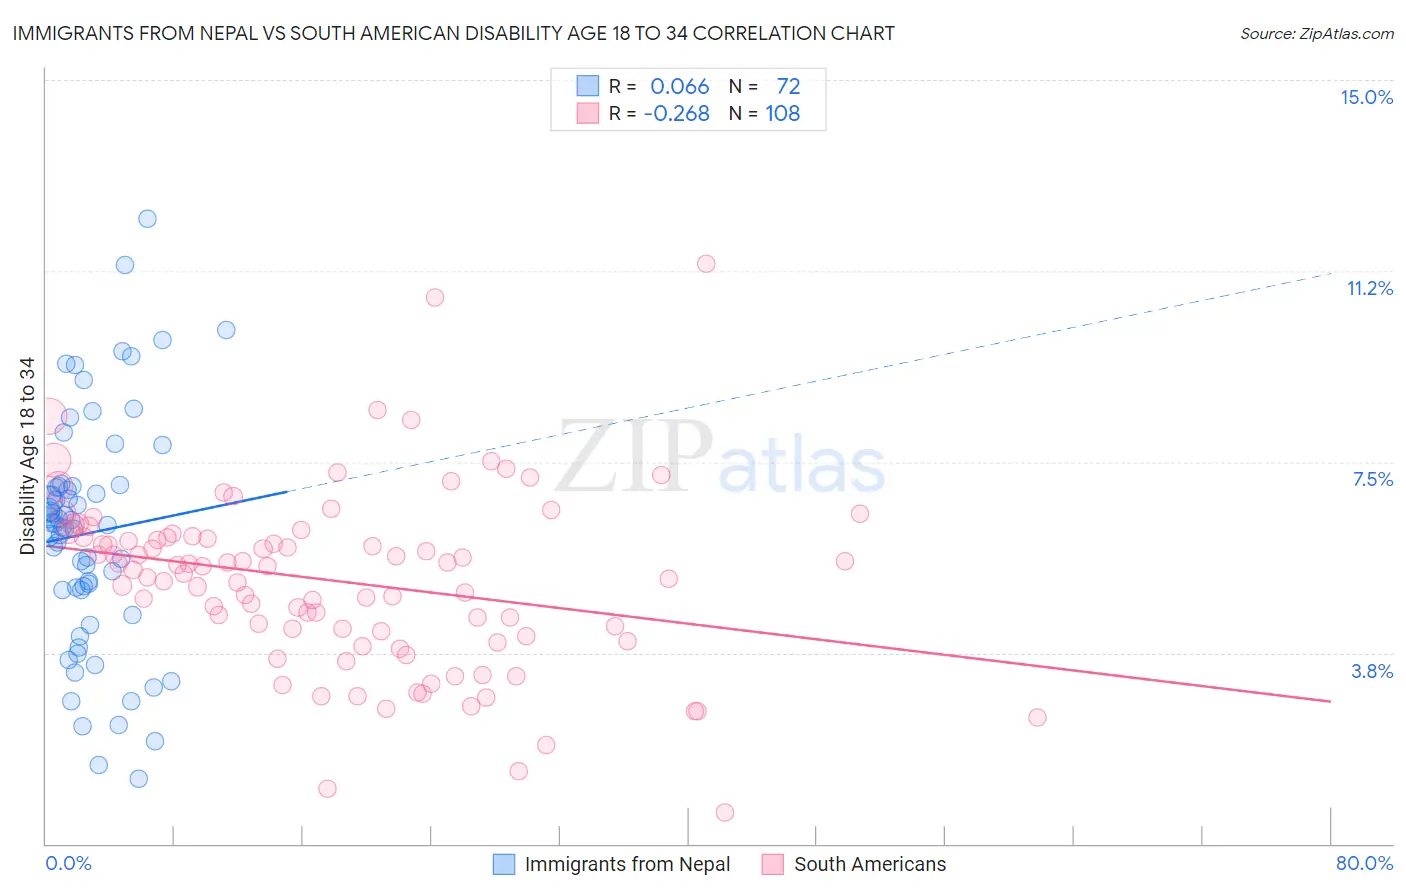 Immigrants from Nepal vs South American Disability Age 18 to 34